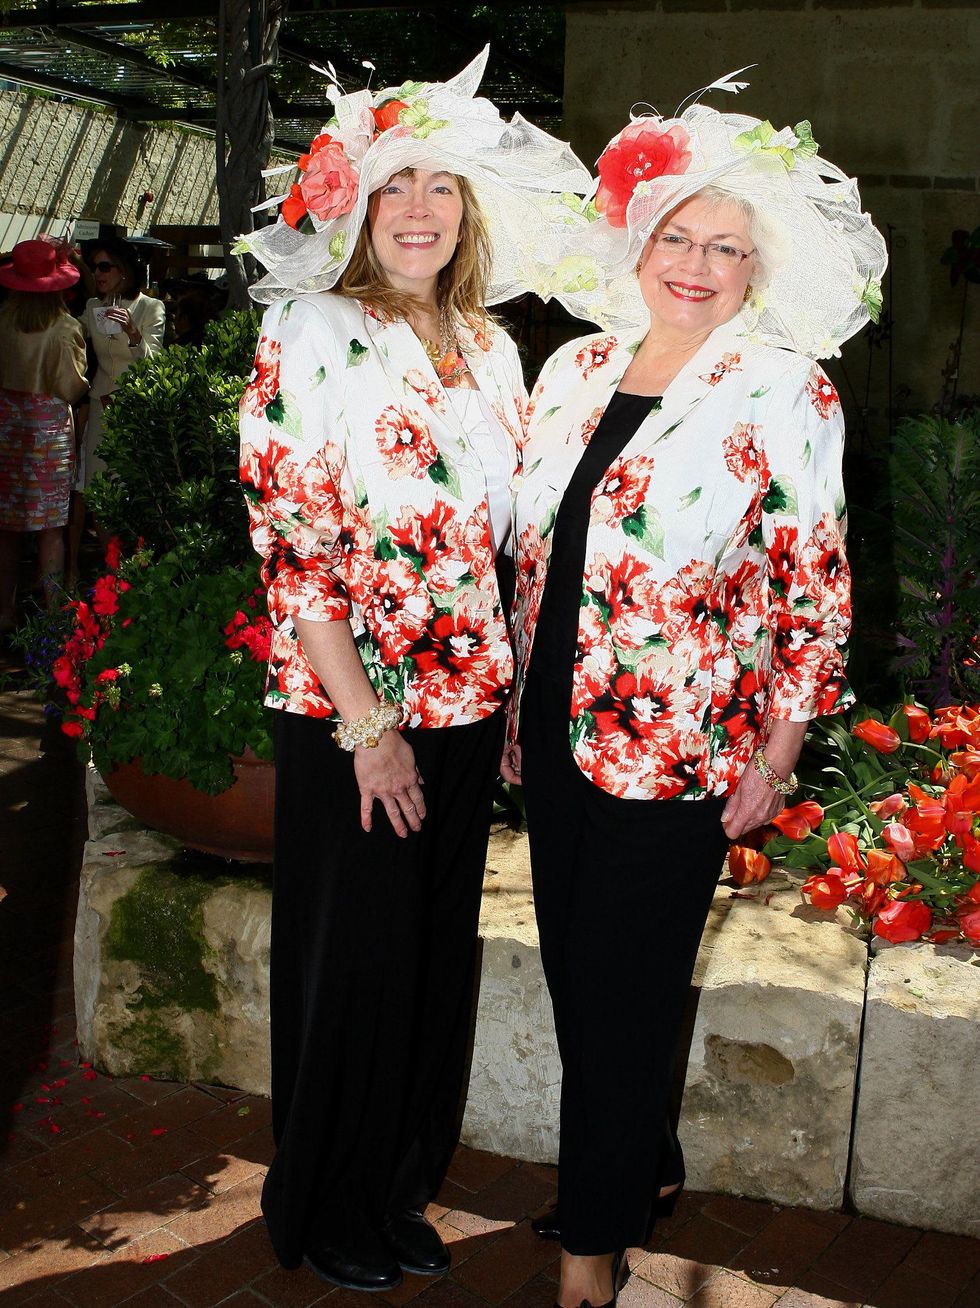 Sky-high hats captivate crowd at 25th annual Mad Hatter's Tea ...